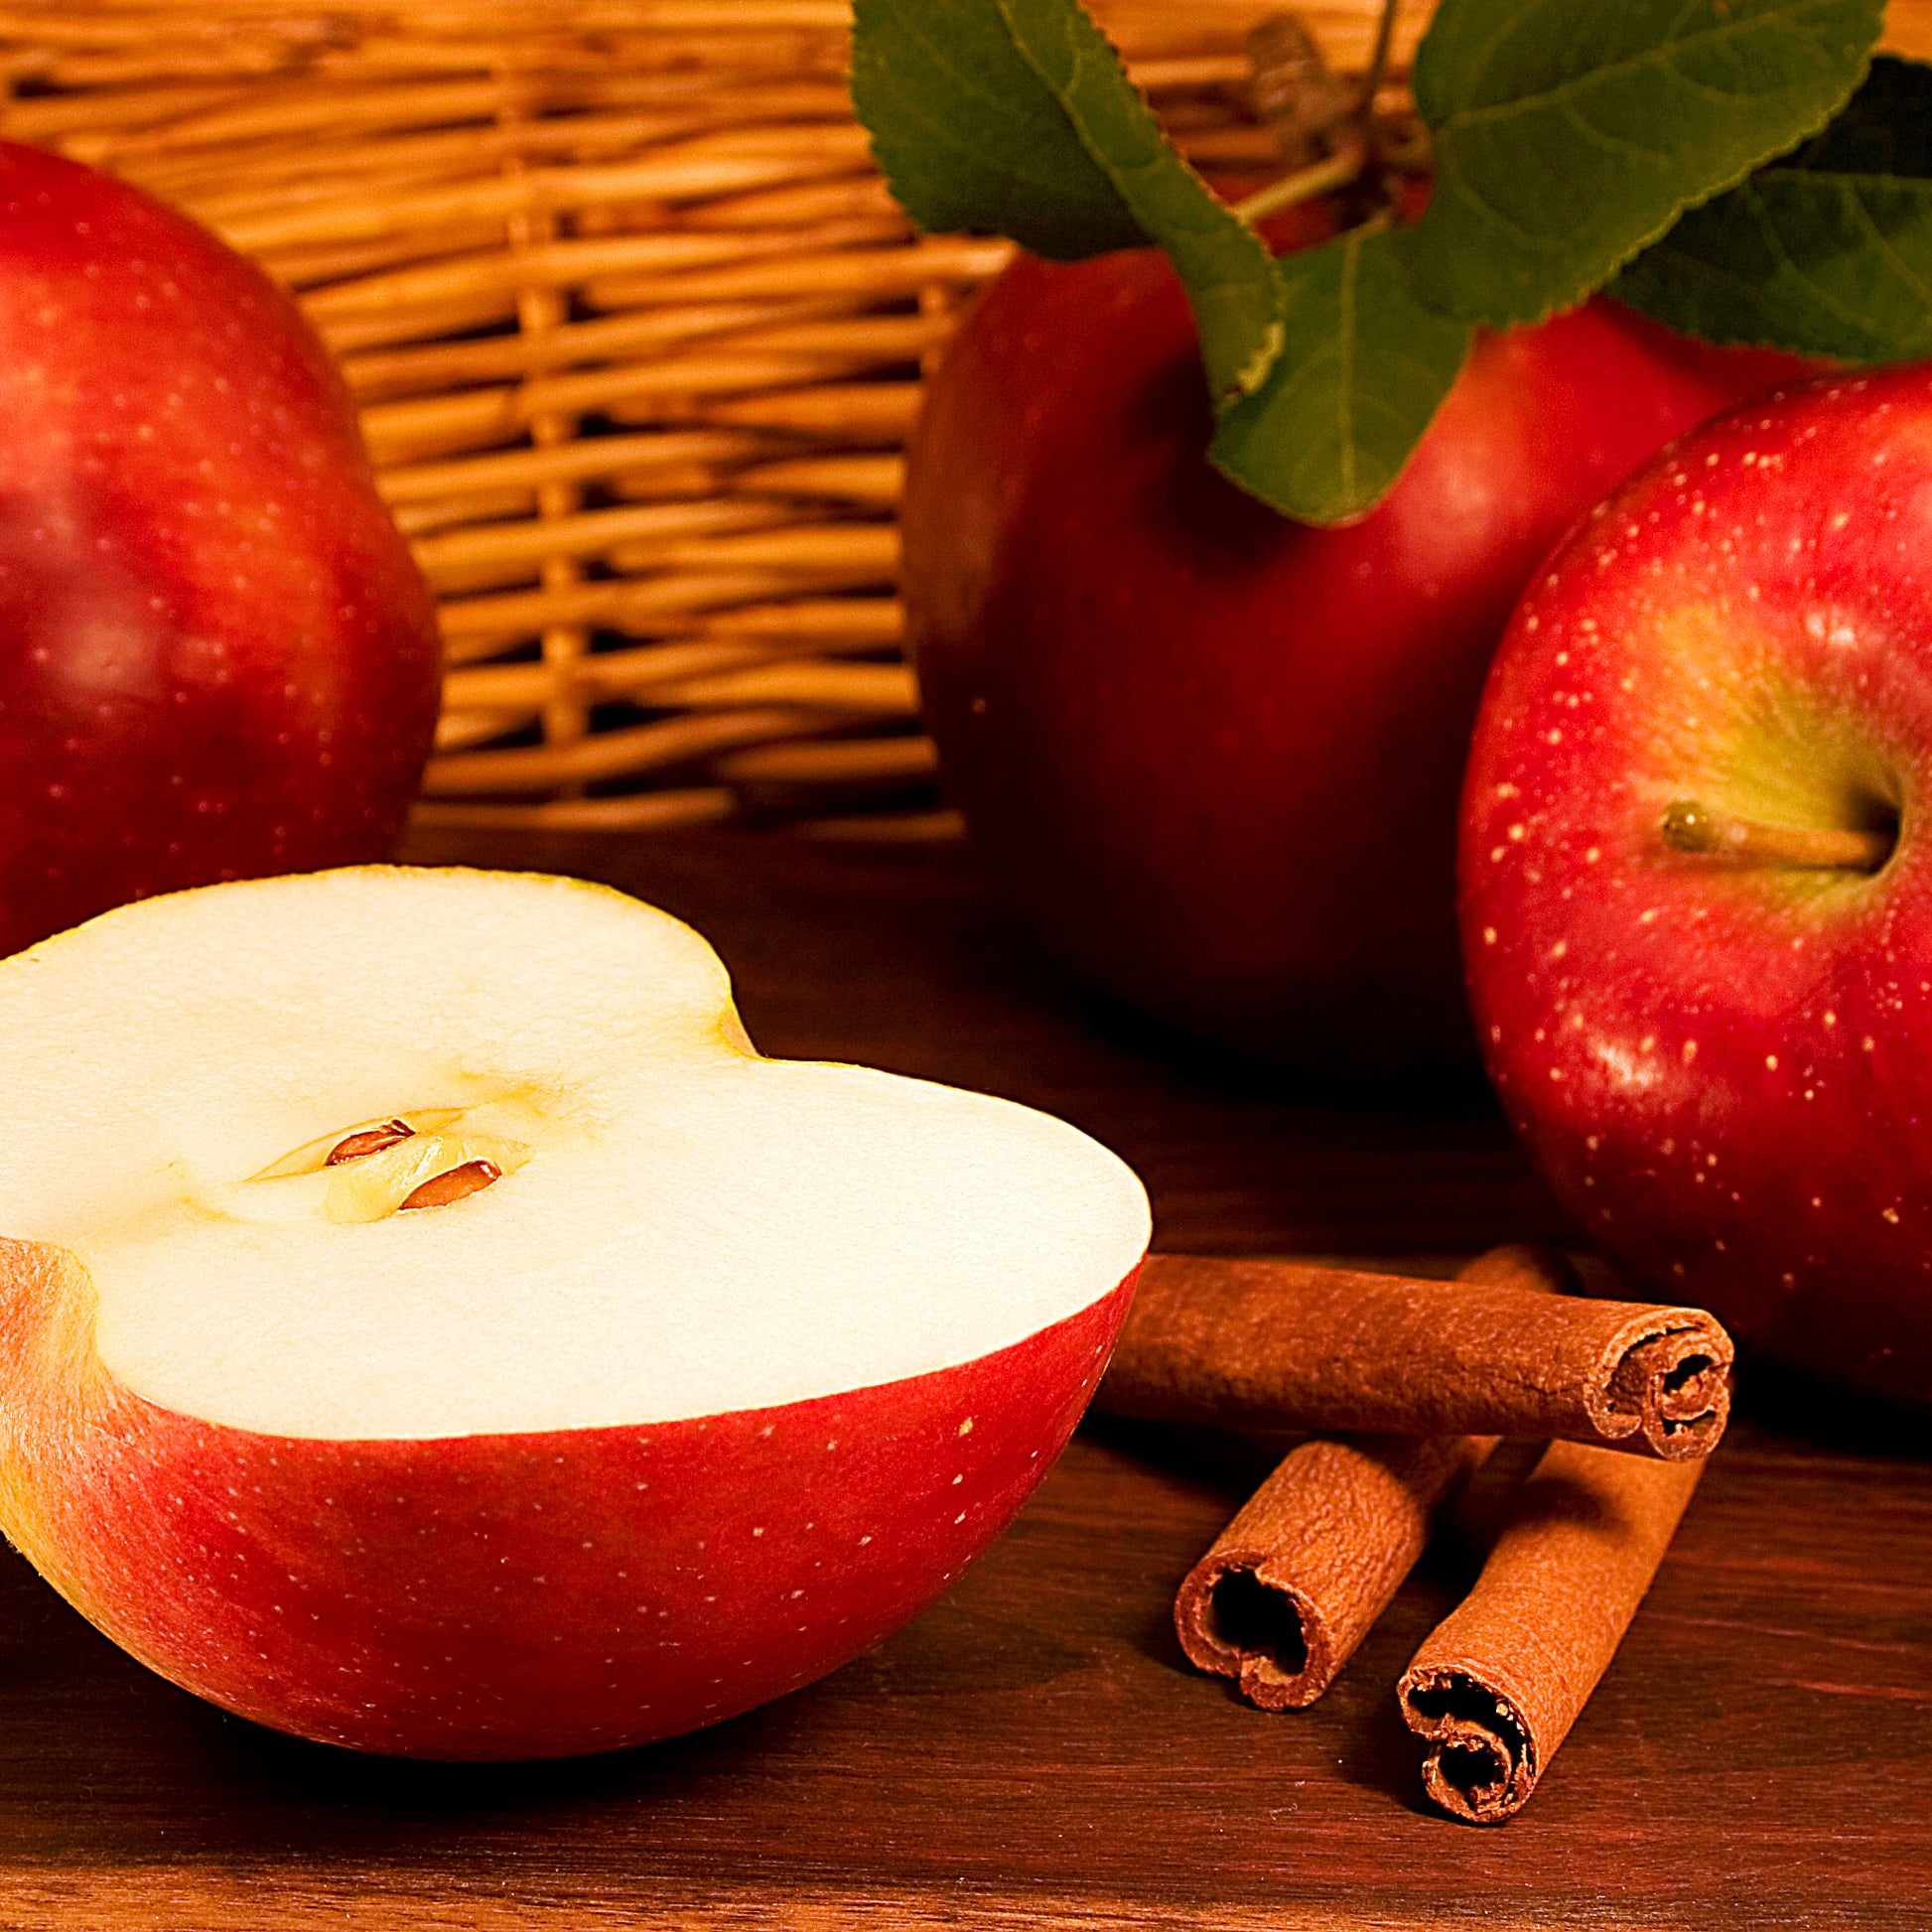 Apple Cinnamon Fragrance Oil (60ml) for Diffusers, Soap Making, Candles,  Lotion, Home Scents, Linen Spray, Bath Bombs, Slime